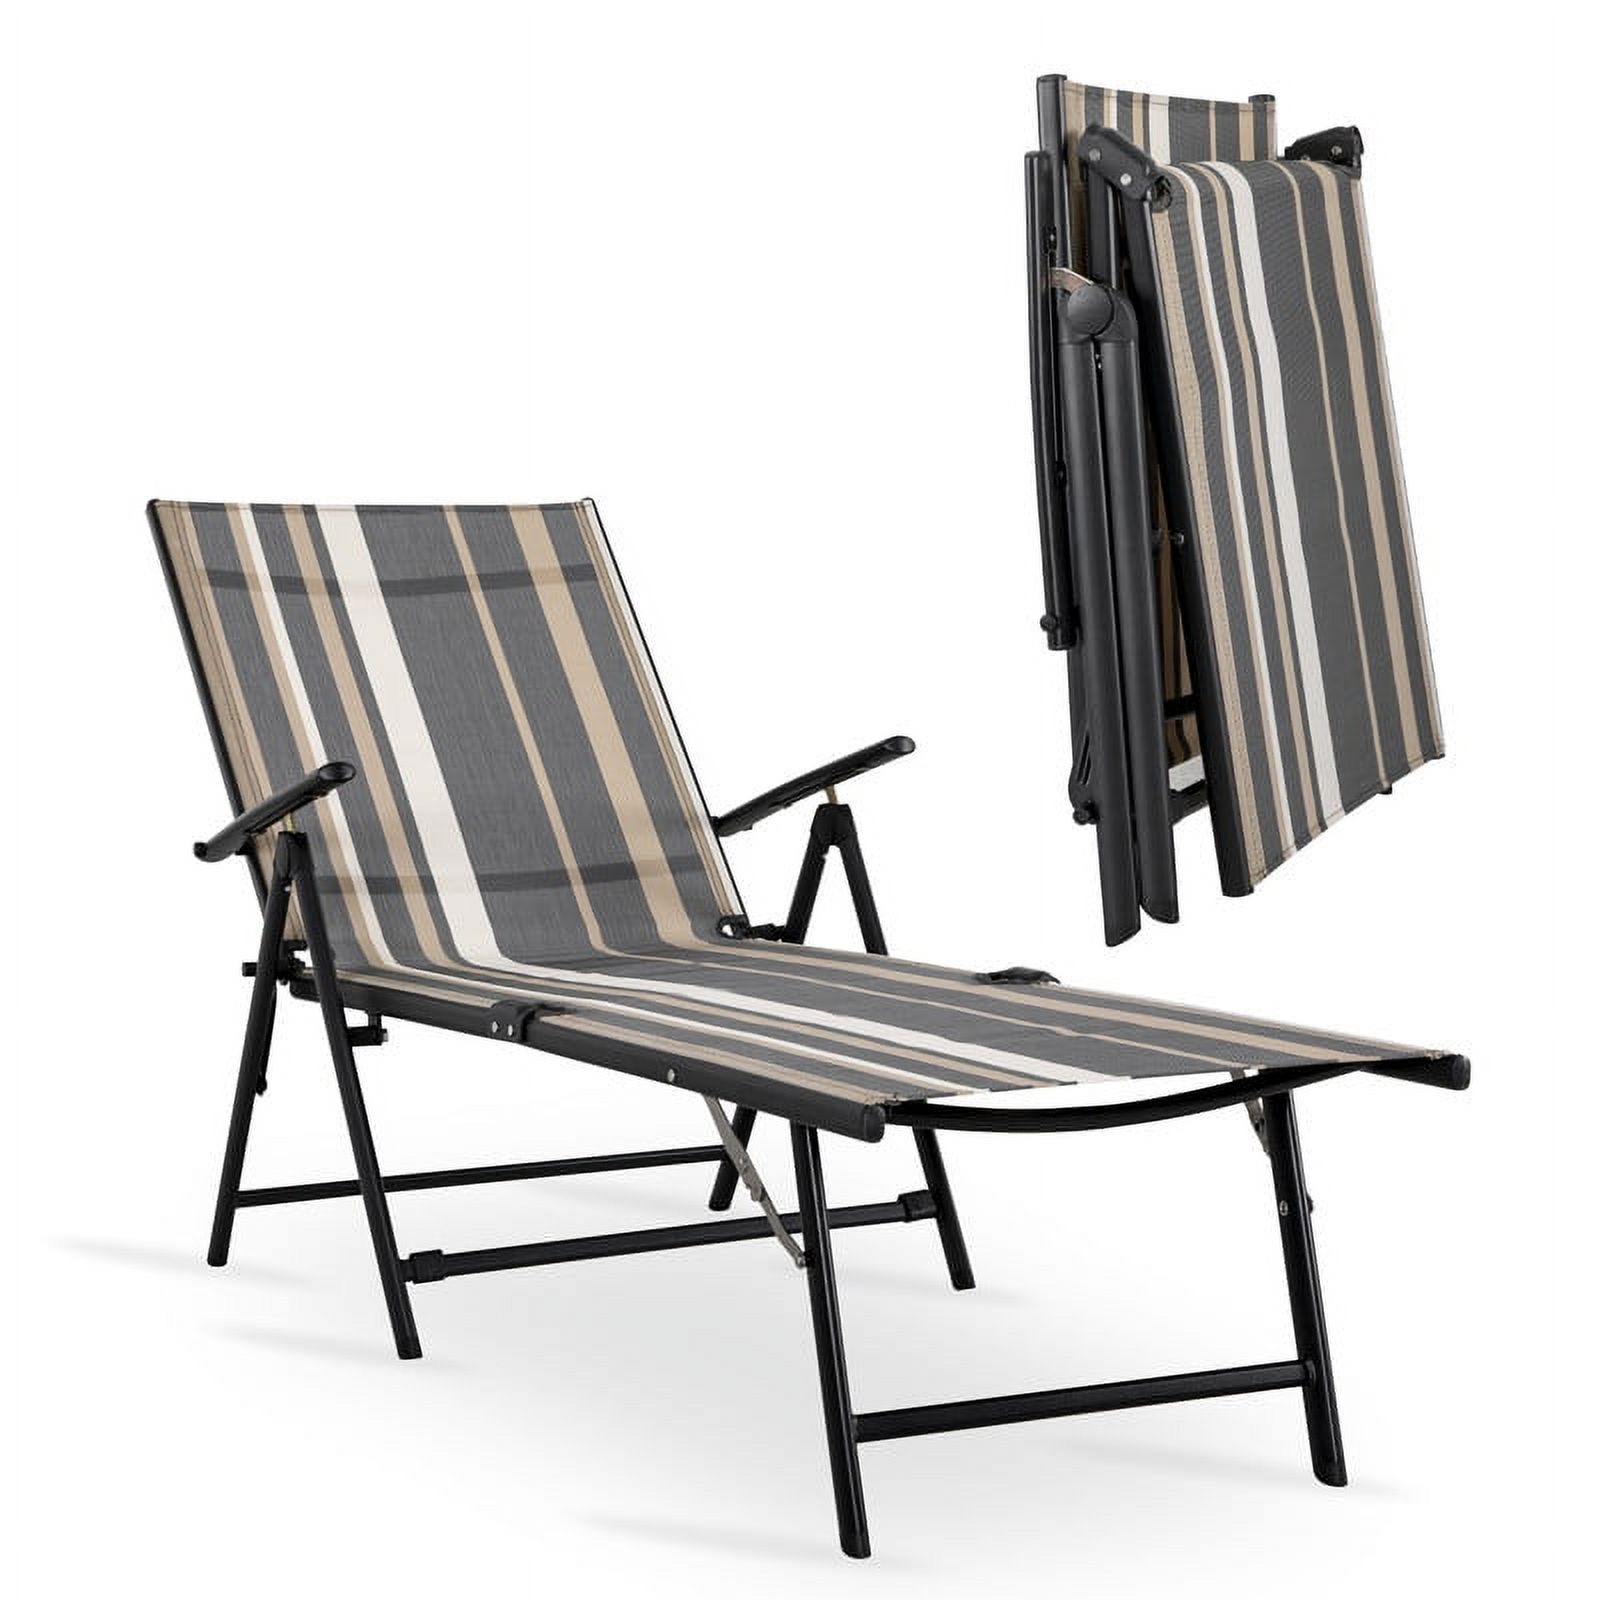 Nuu Garden Outdoor Patio Chaise Lounge Chair Adjustable Folding Pool Lounger w/ Steel Frame - Stripe - image 1 of 9